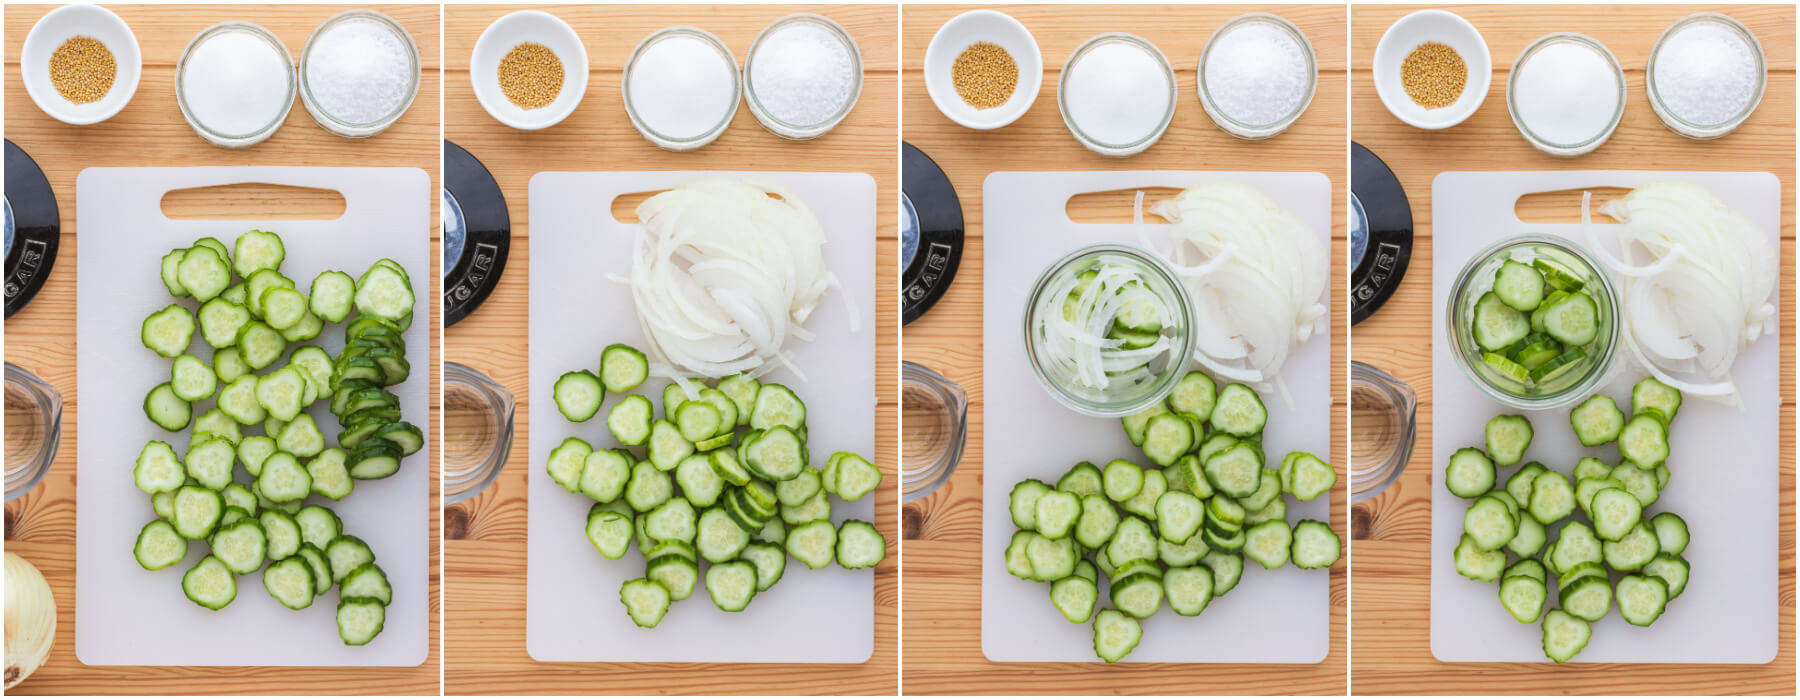 A series of process images showing how to stack sliced cucumbers and onions in a jar.